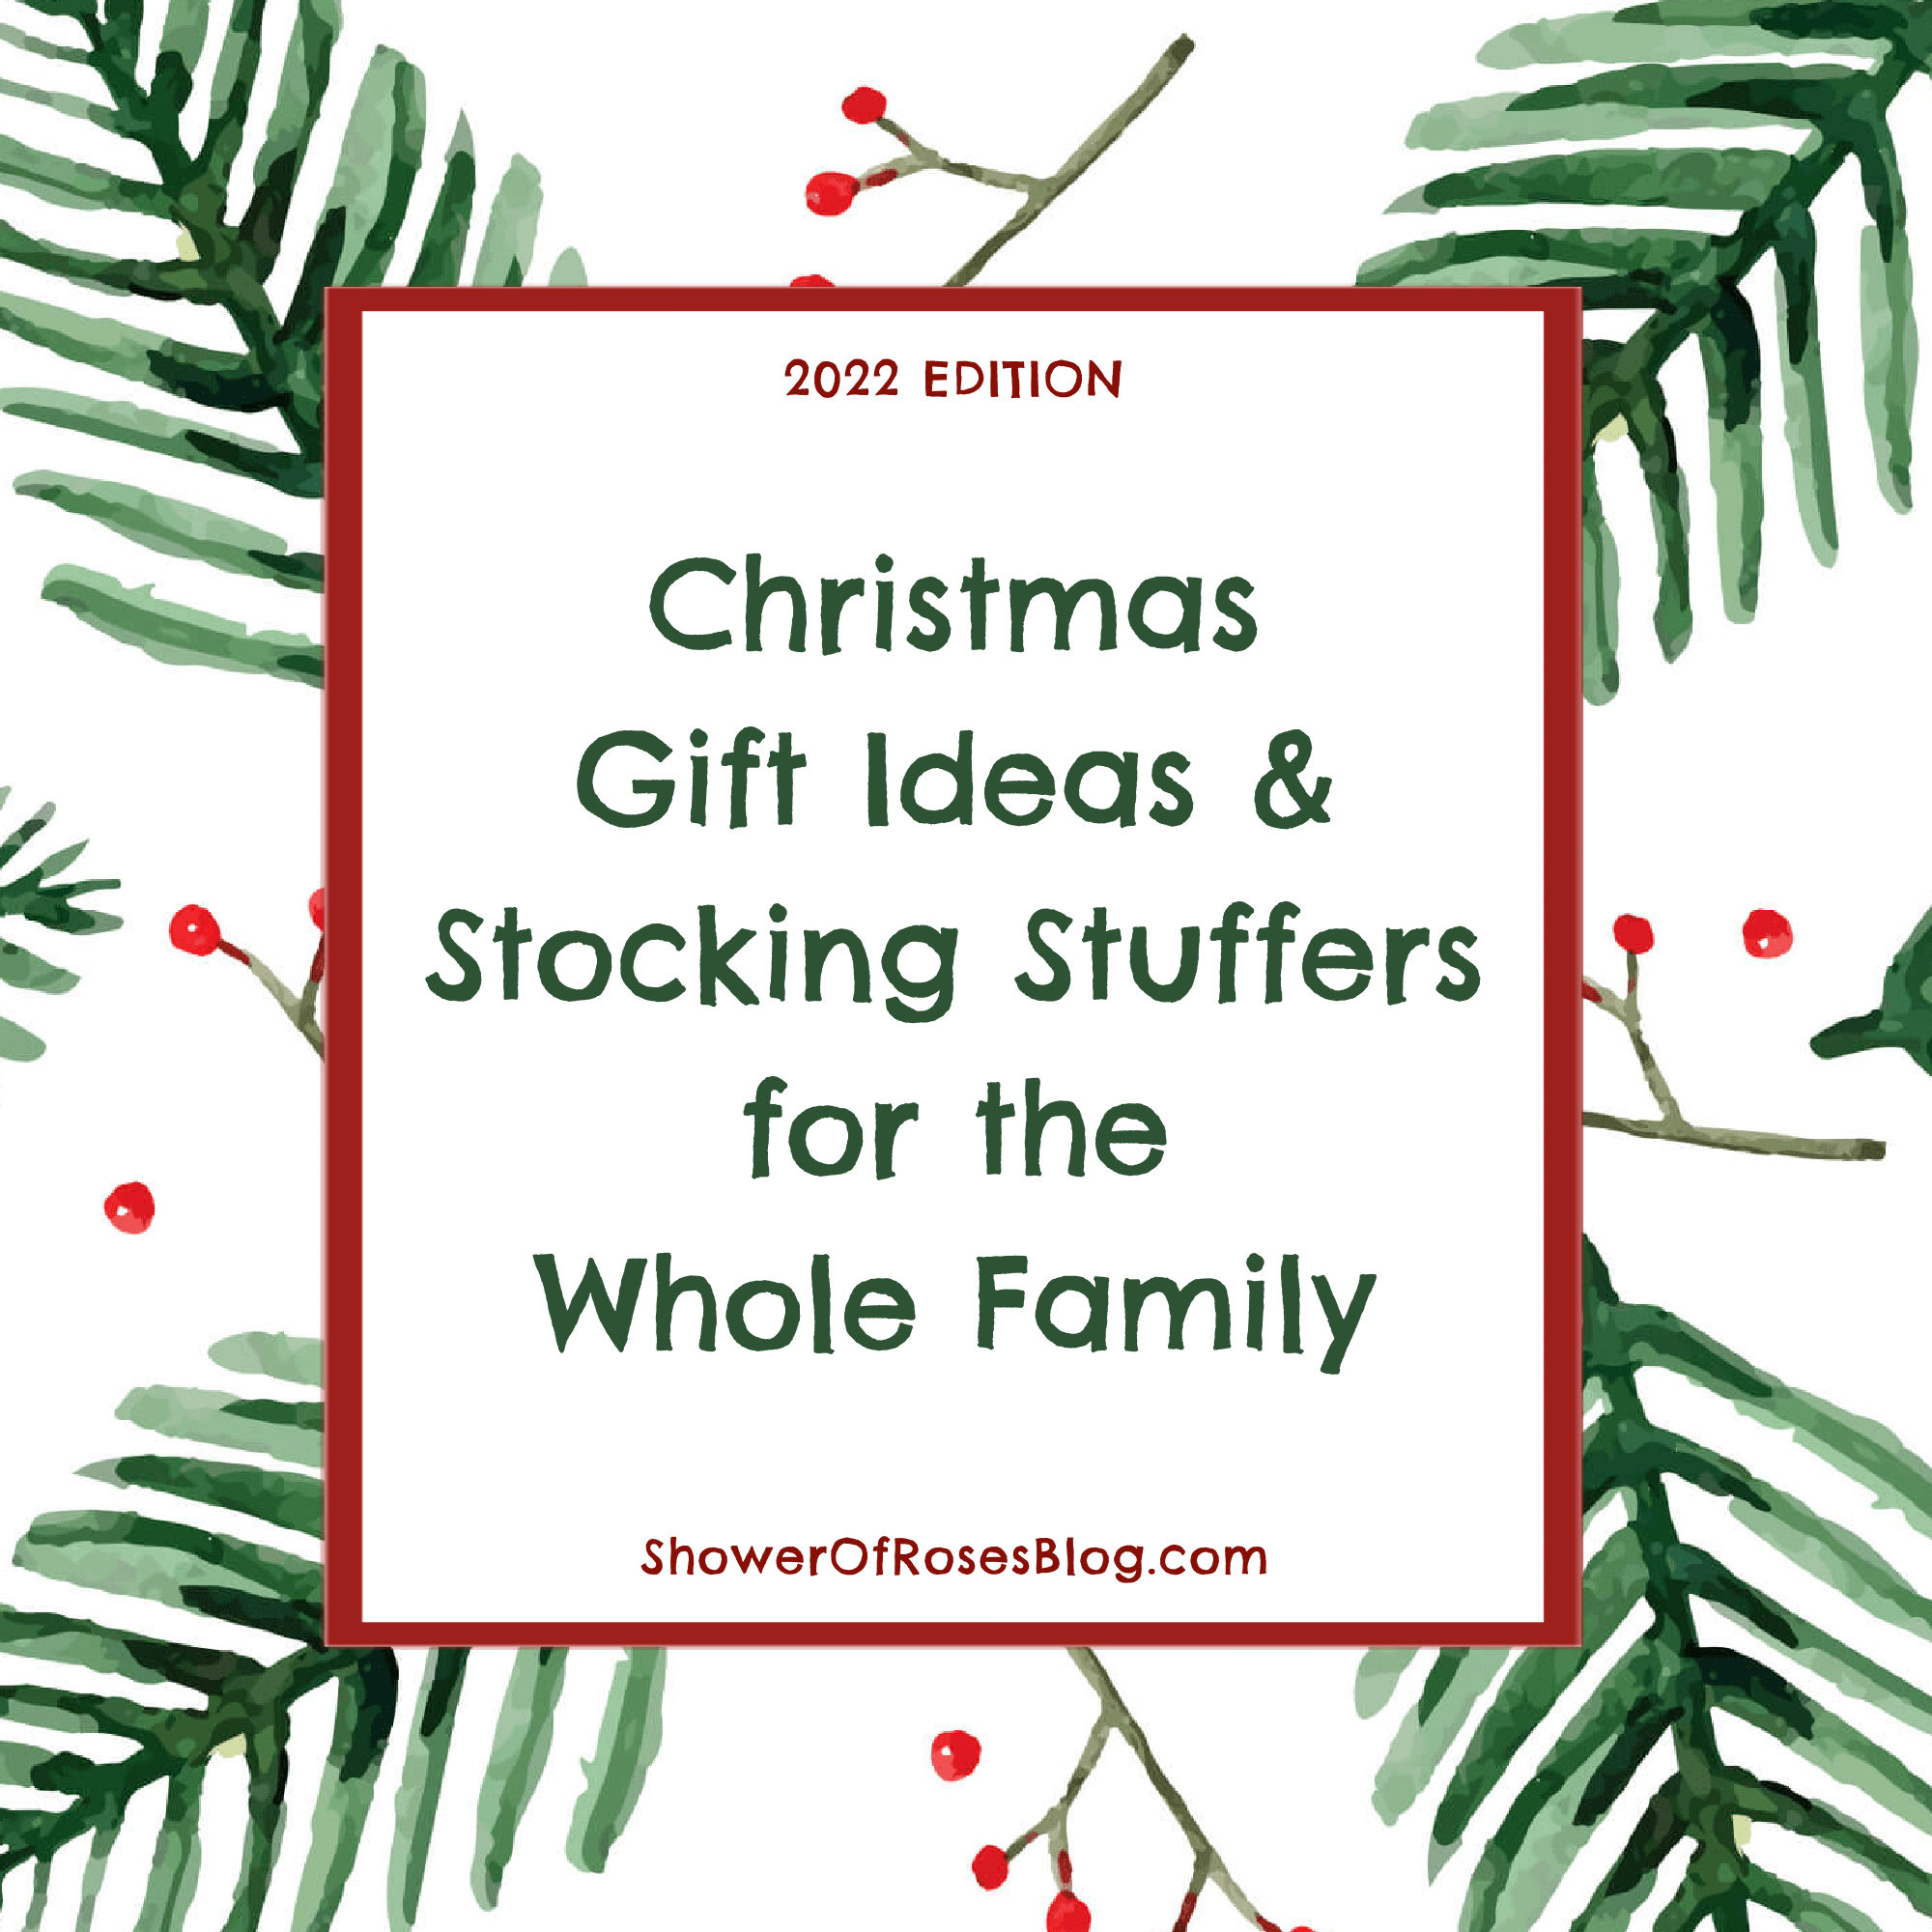 Stocking Stuffers for Everyone - Small Gifts, Big Smiles - Nick + Alicia